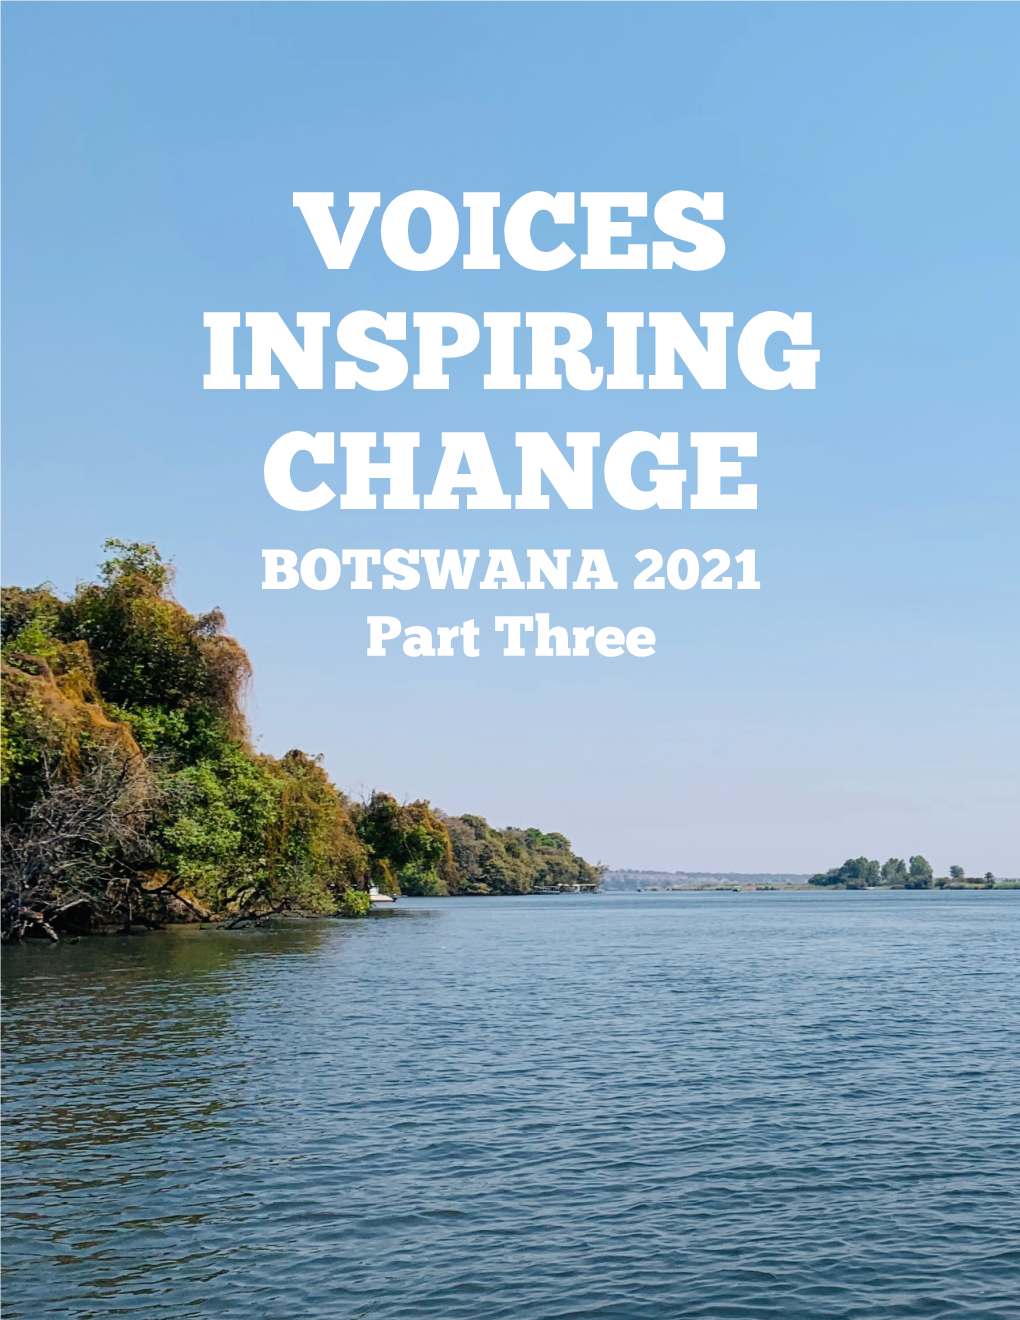 Download the ACS Botswana Voices Inspiring Change